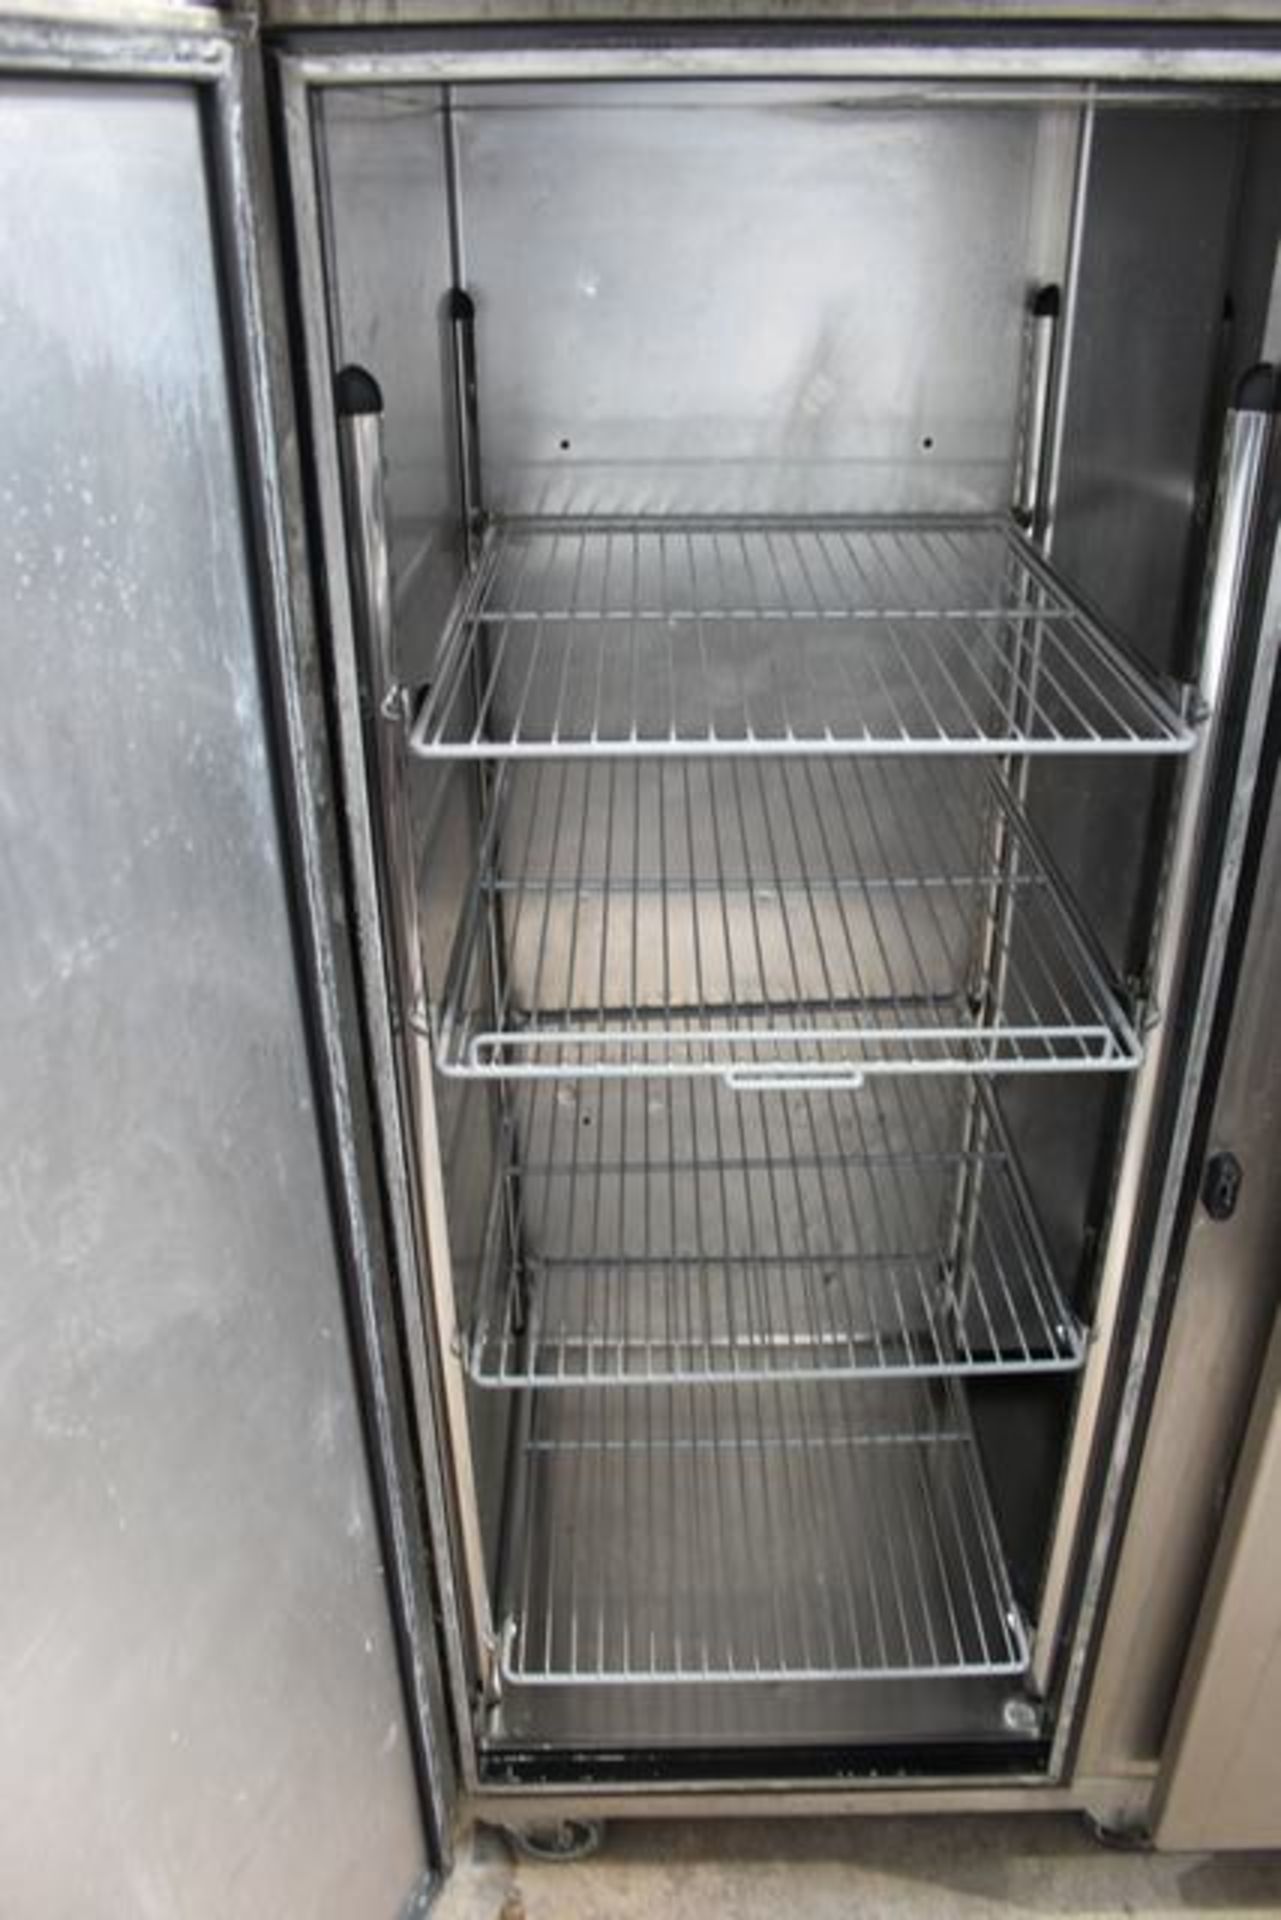 Foster PSG1350 L/A Eco Pro 1350 Litre Upright Freezer Cabinet Temp Range: -18/-21 °C stainless steel - Image 2 of 2